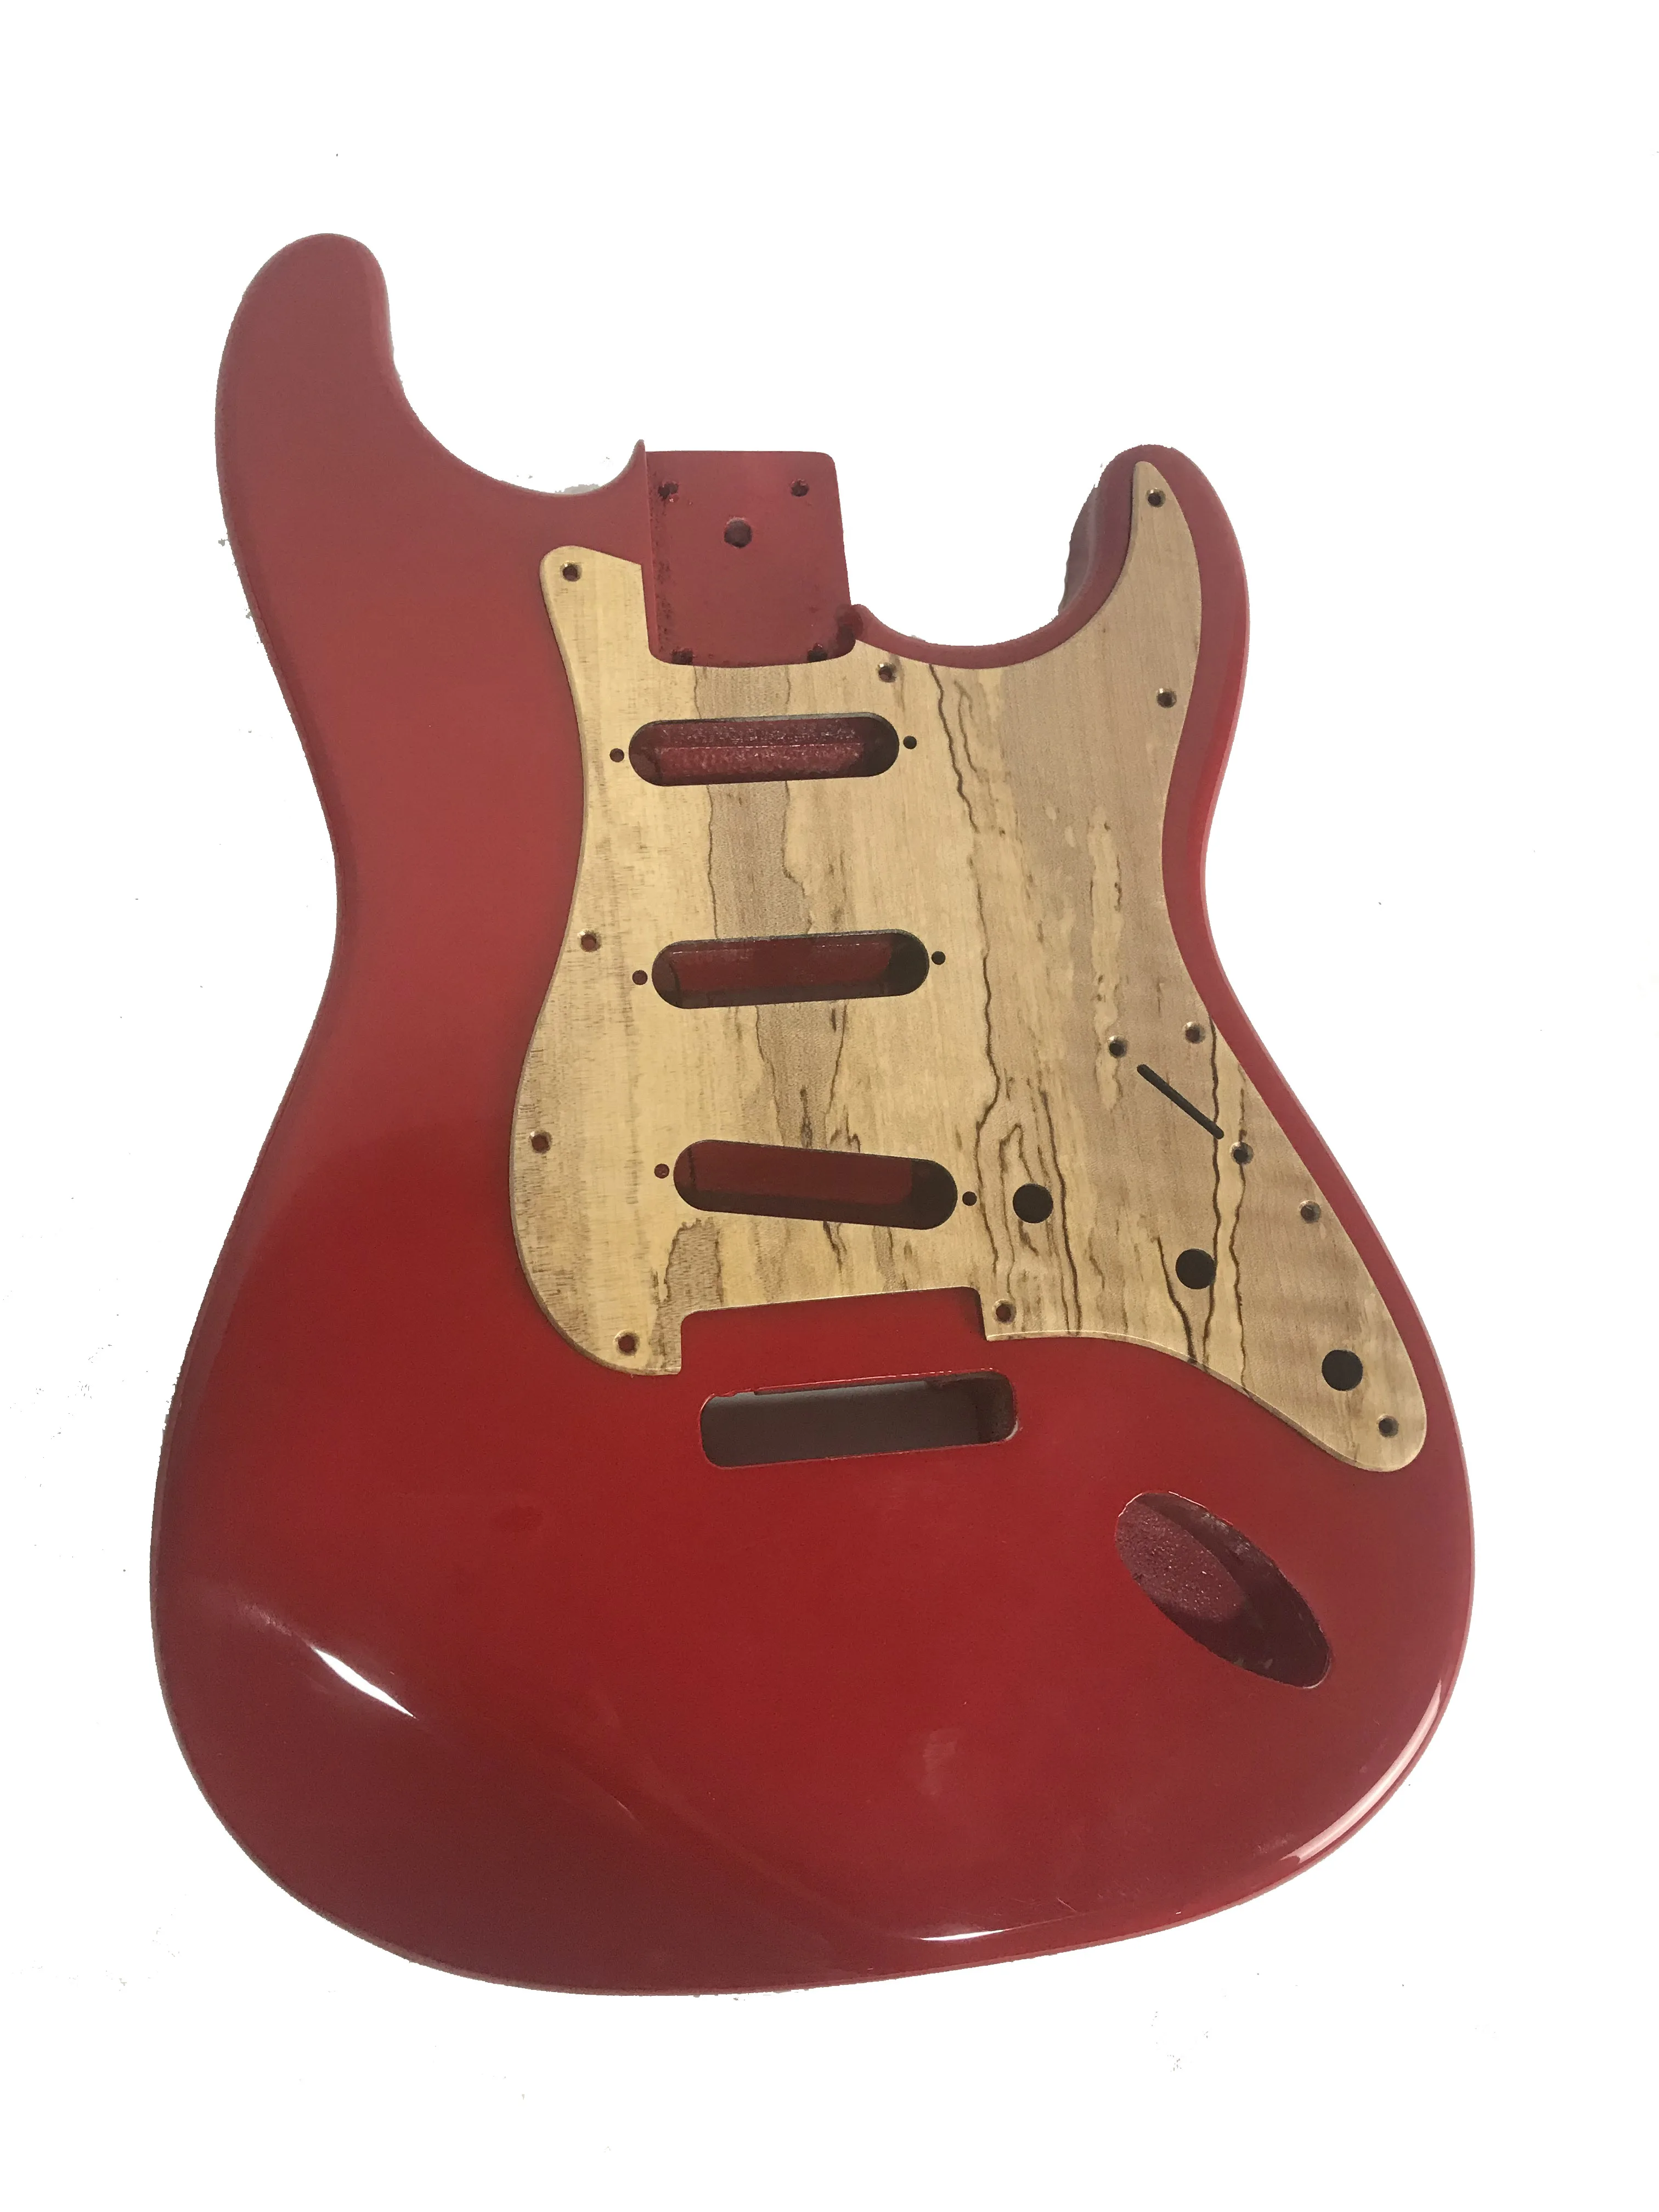 NEW Strat Electric Guitar Body Maple Guitar with Pickguard Semi-finished Manual DIY Guitar Barrel Replacement Guitar Accessories enlarge